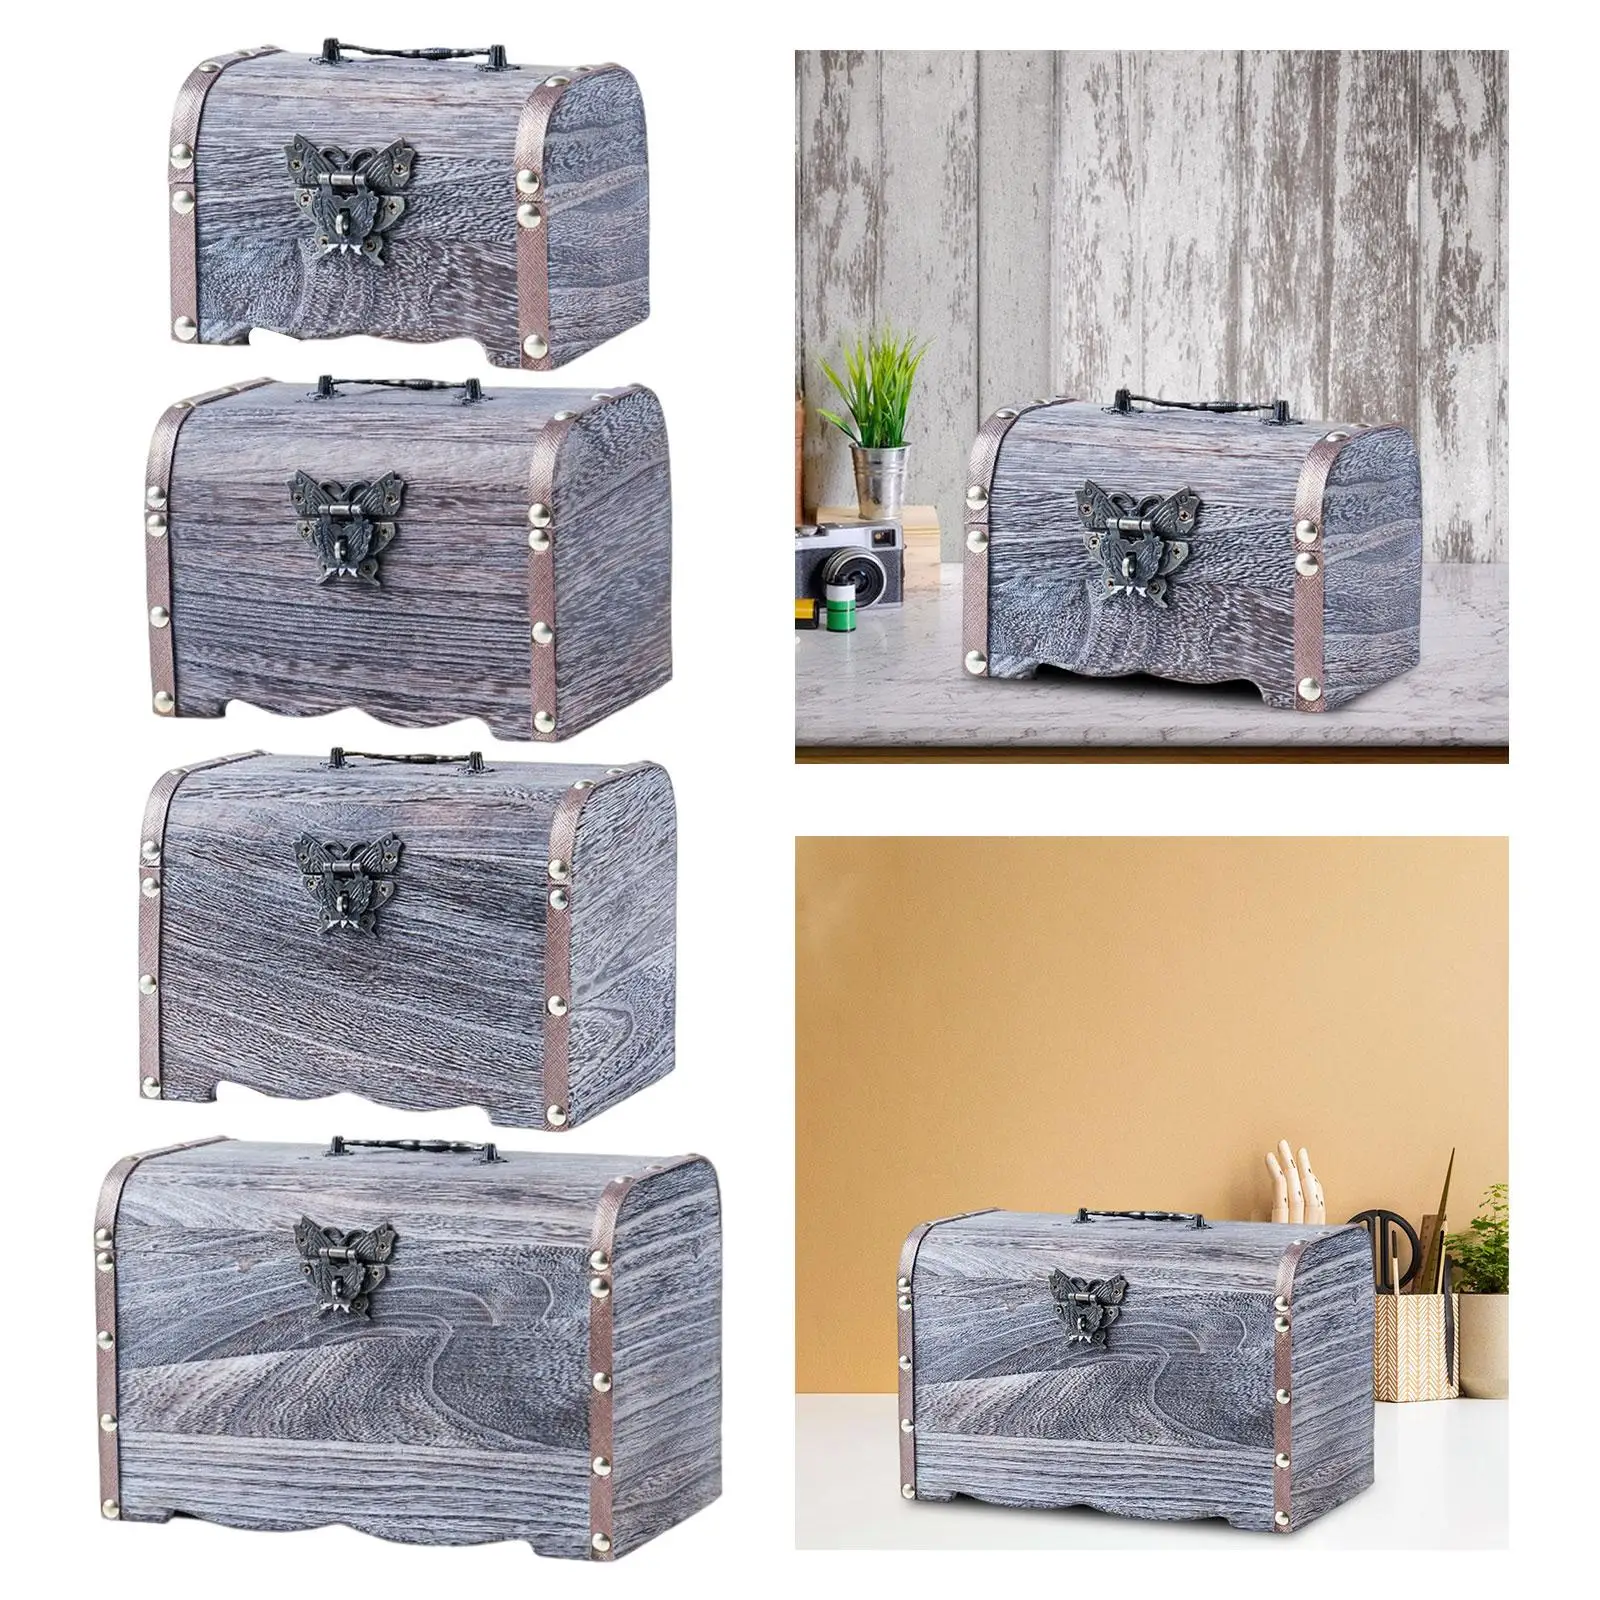 Treasure Chest Retro Style with Top Handle Storage Box Decoration Piggy Bank Money Saving Box for Girls Boys Prizes Adults Kids